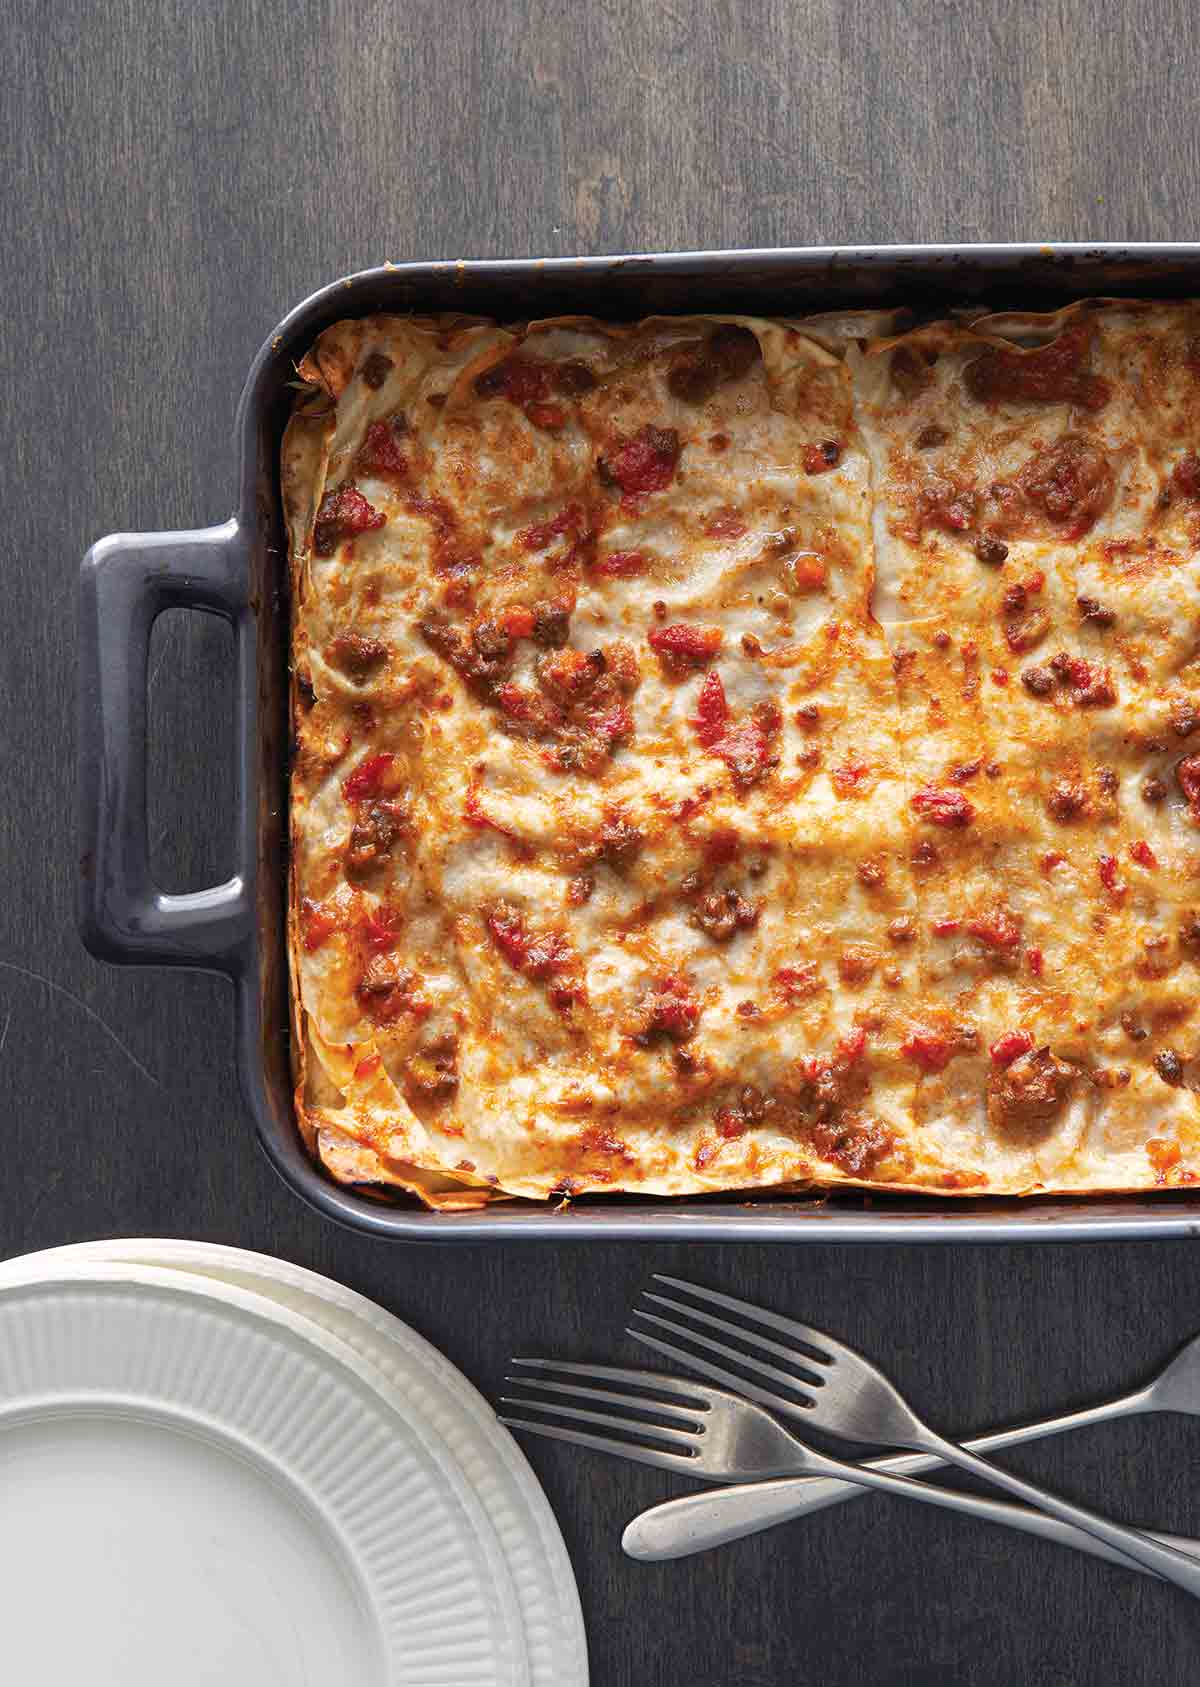 A rectangular baking dish filled with a whole lasagna with plates and forks on the side.